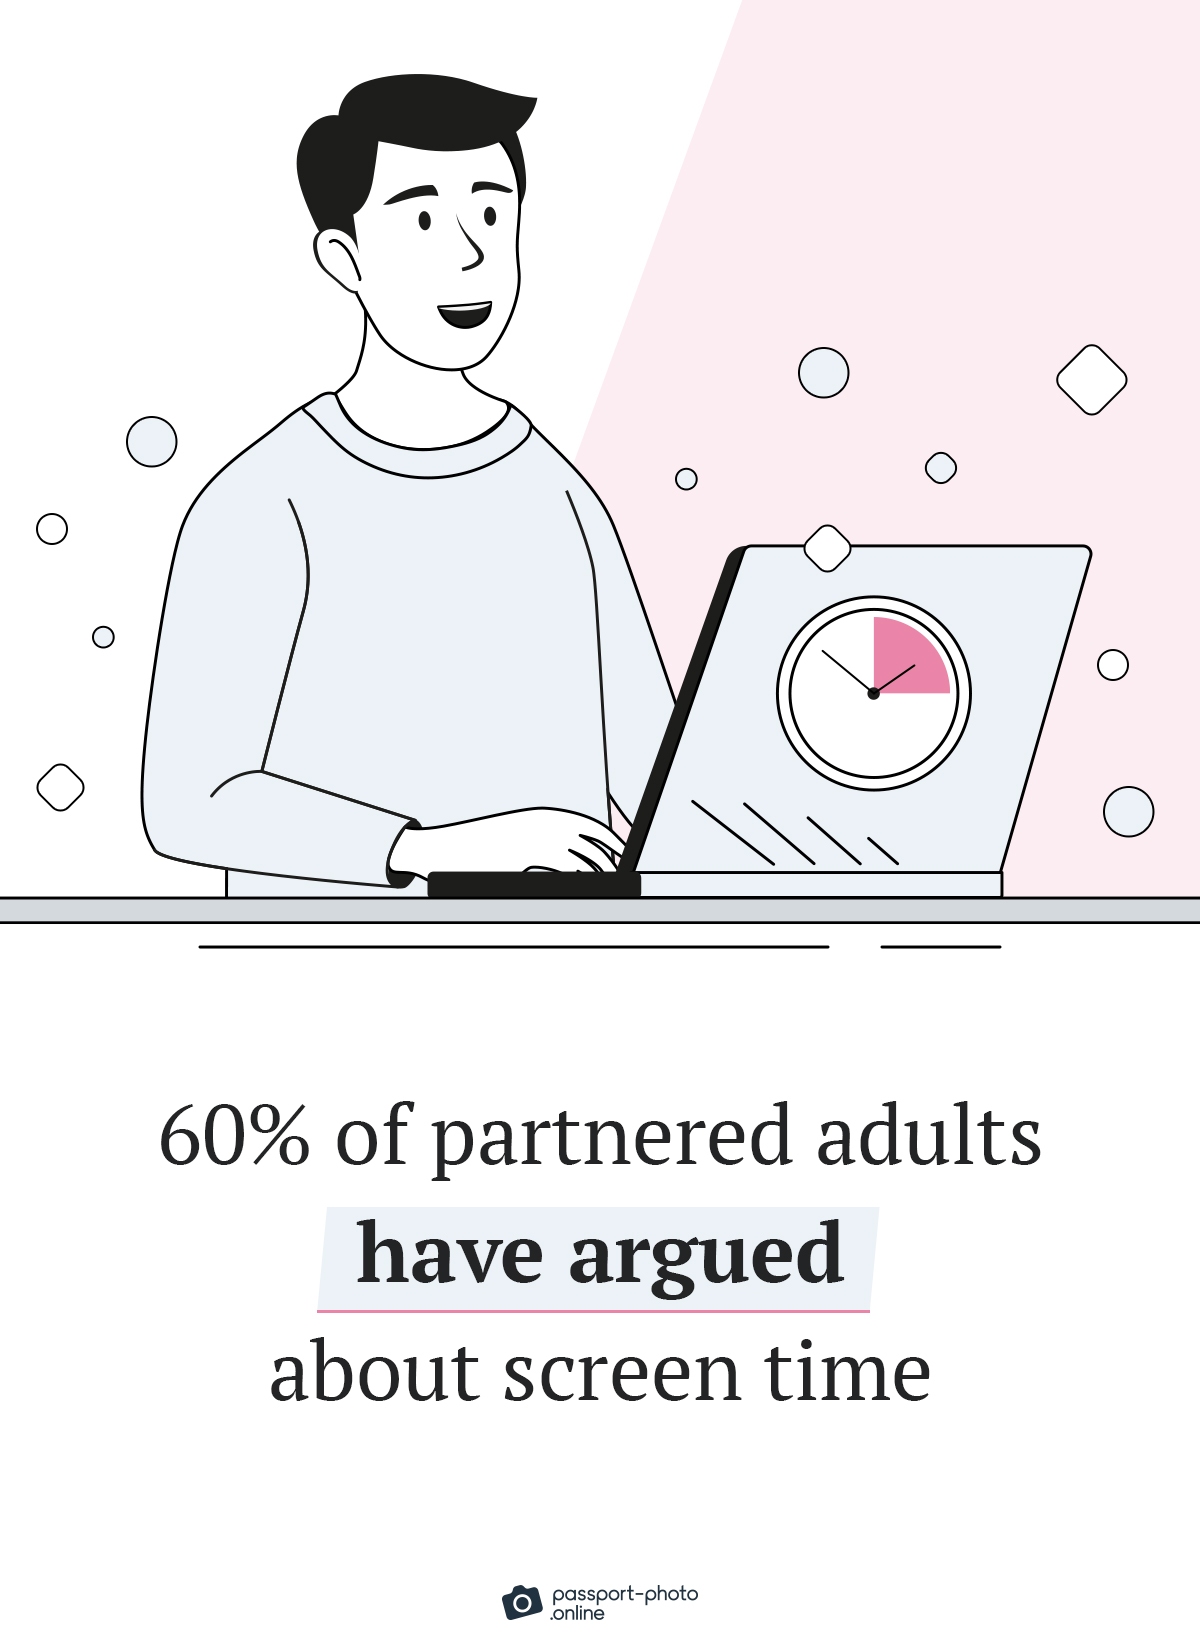 60% of partnered adults have argued about screen time